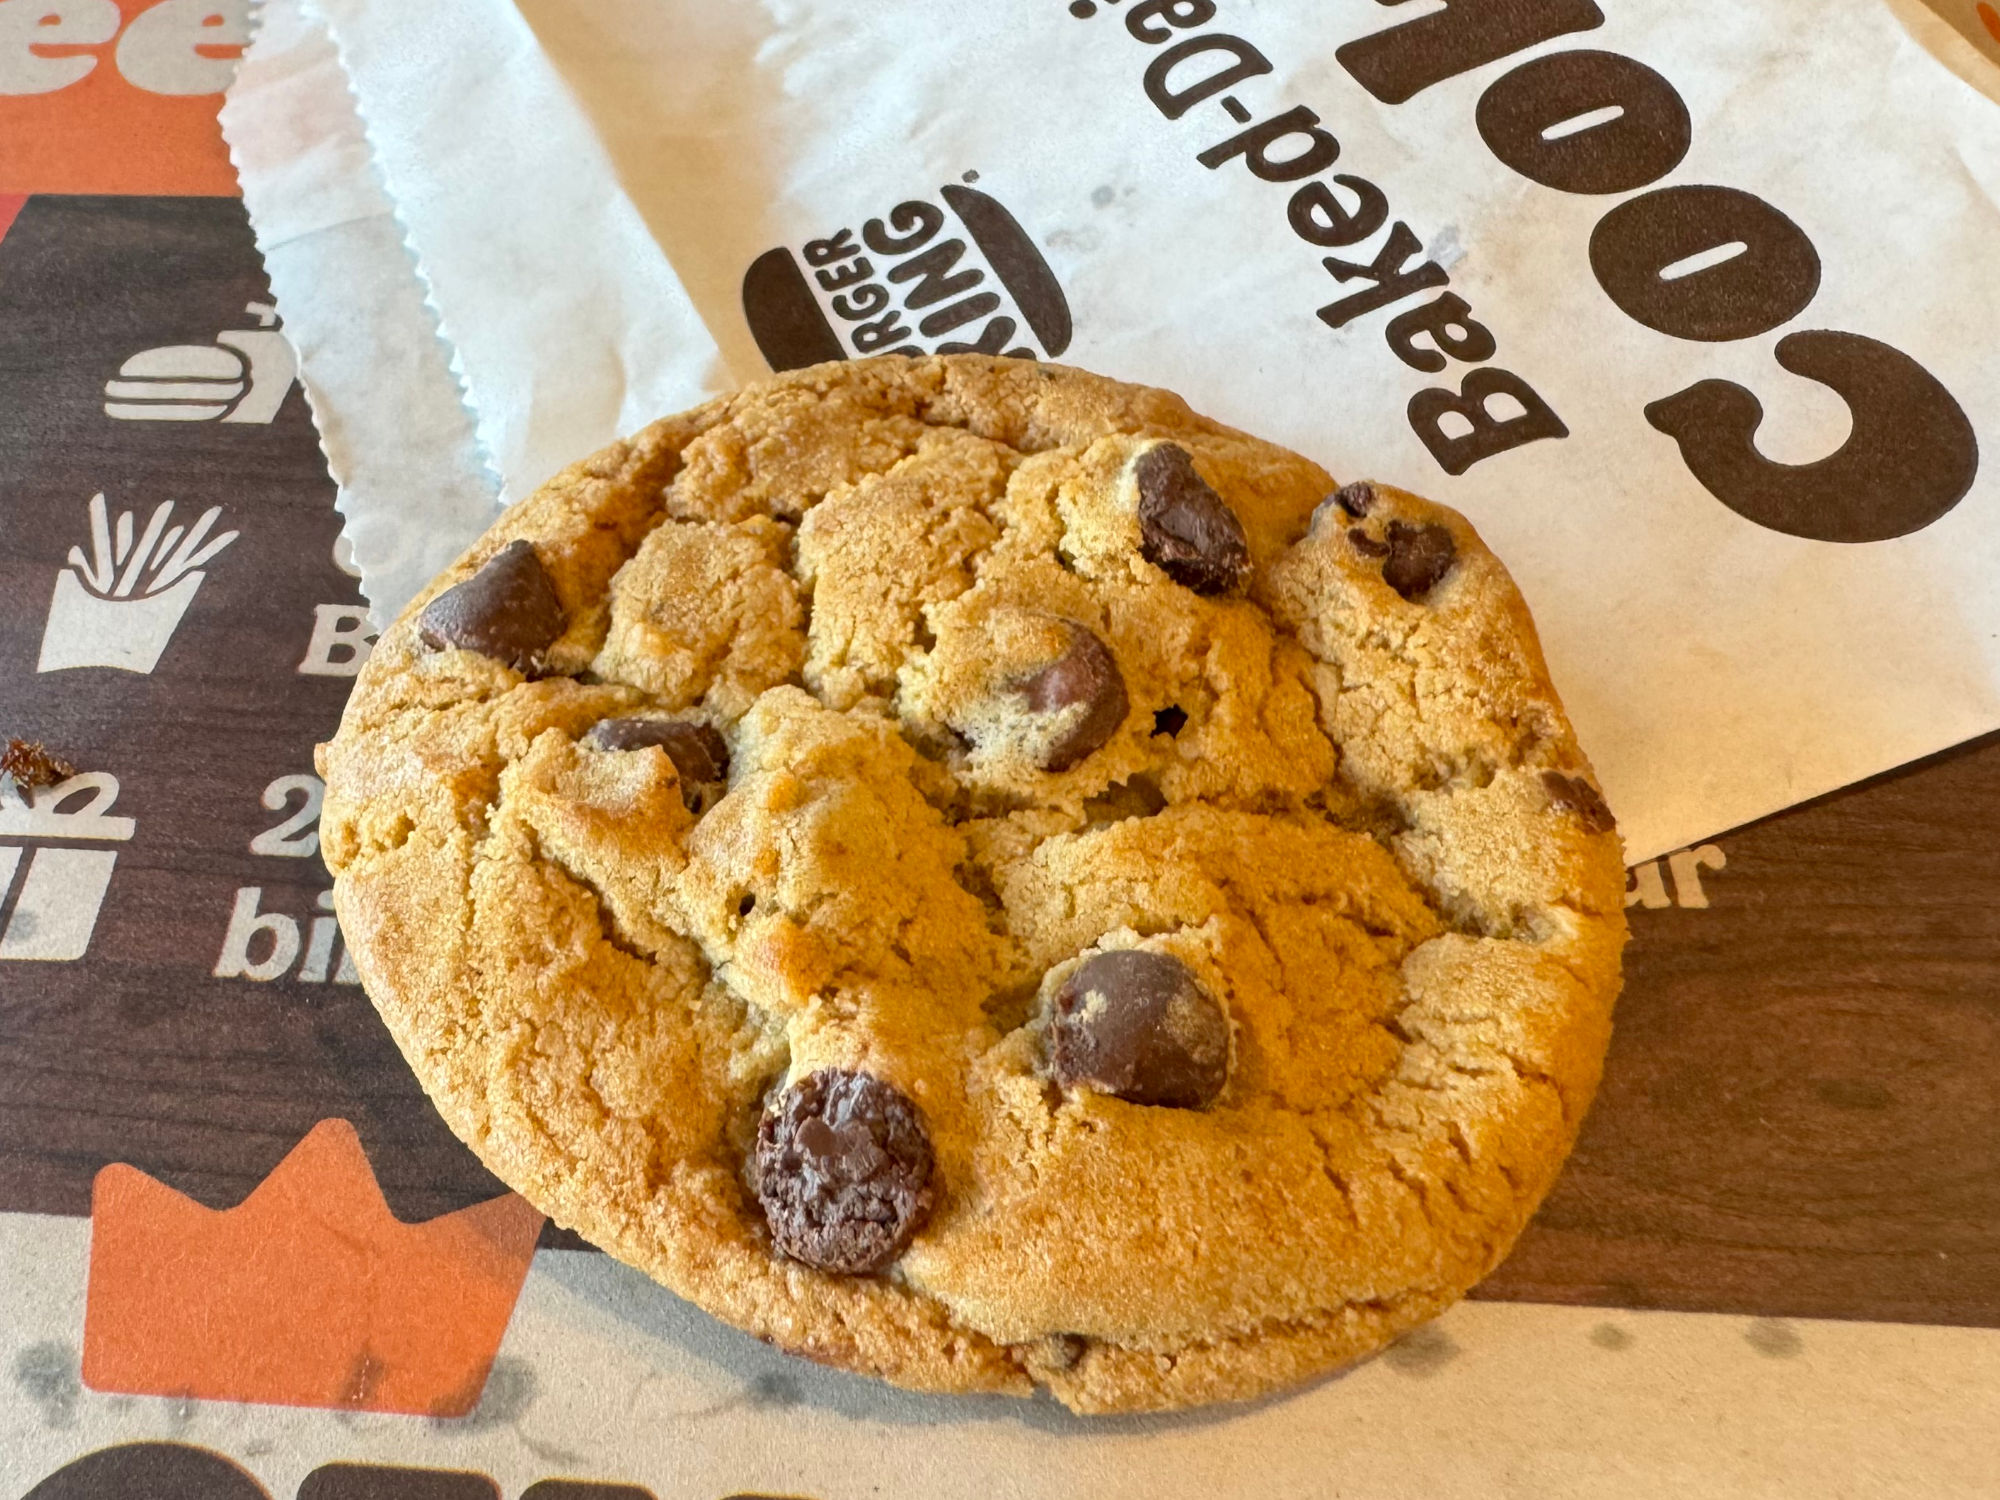 Burger King Chocolate Chip Cookie